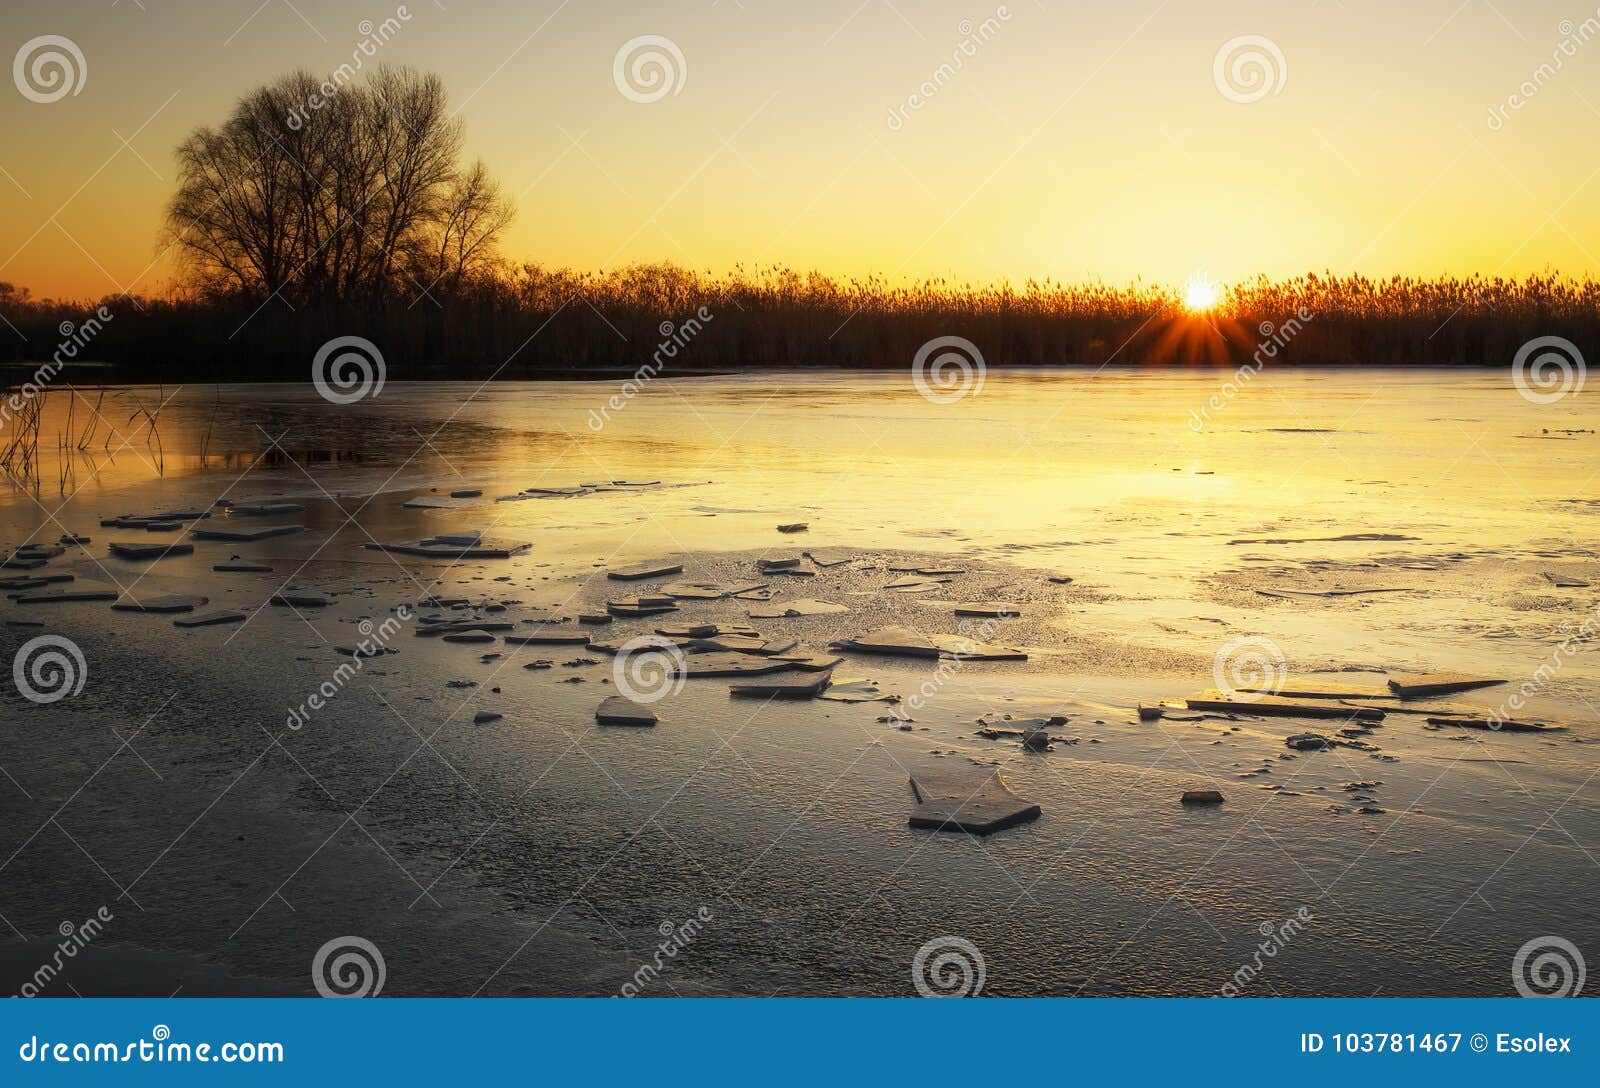 Winter Landscape with Frozen River, Reeds and Sunset Sky. Stock Image ...